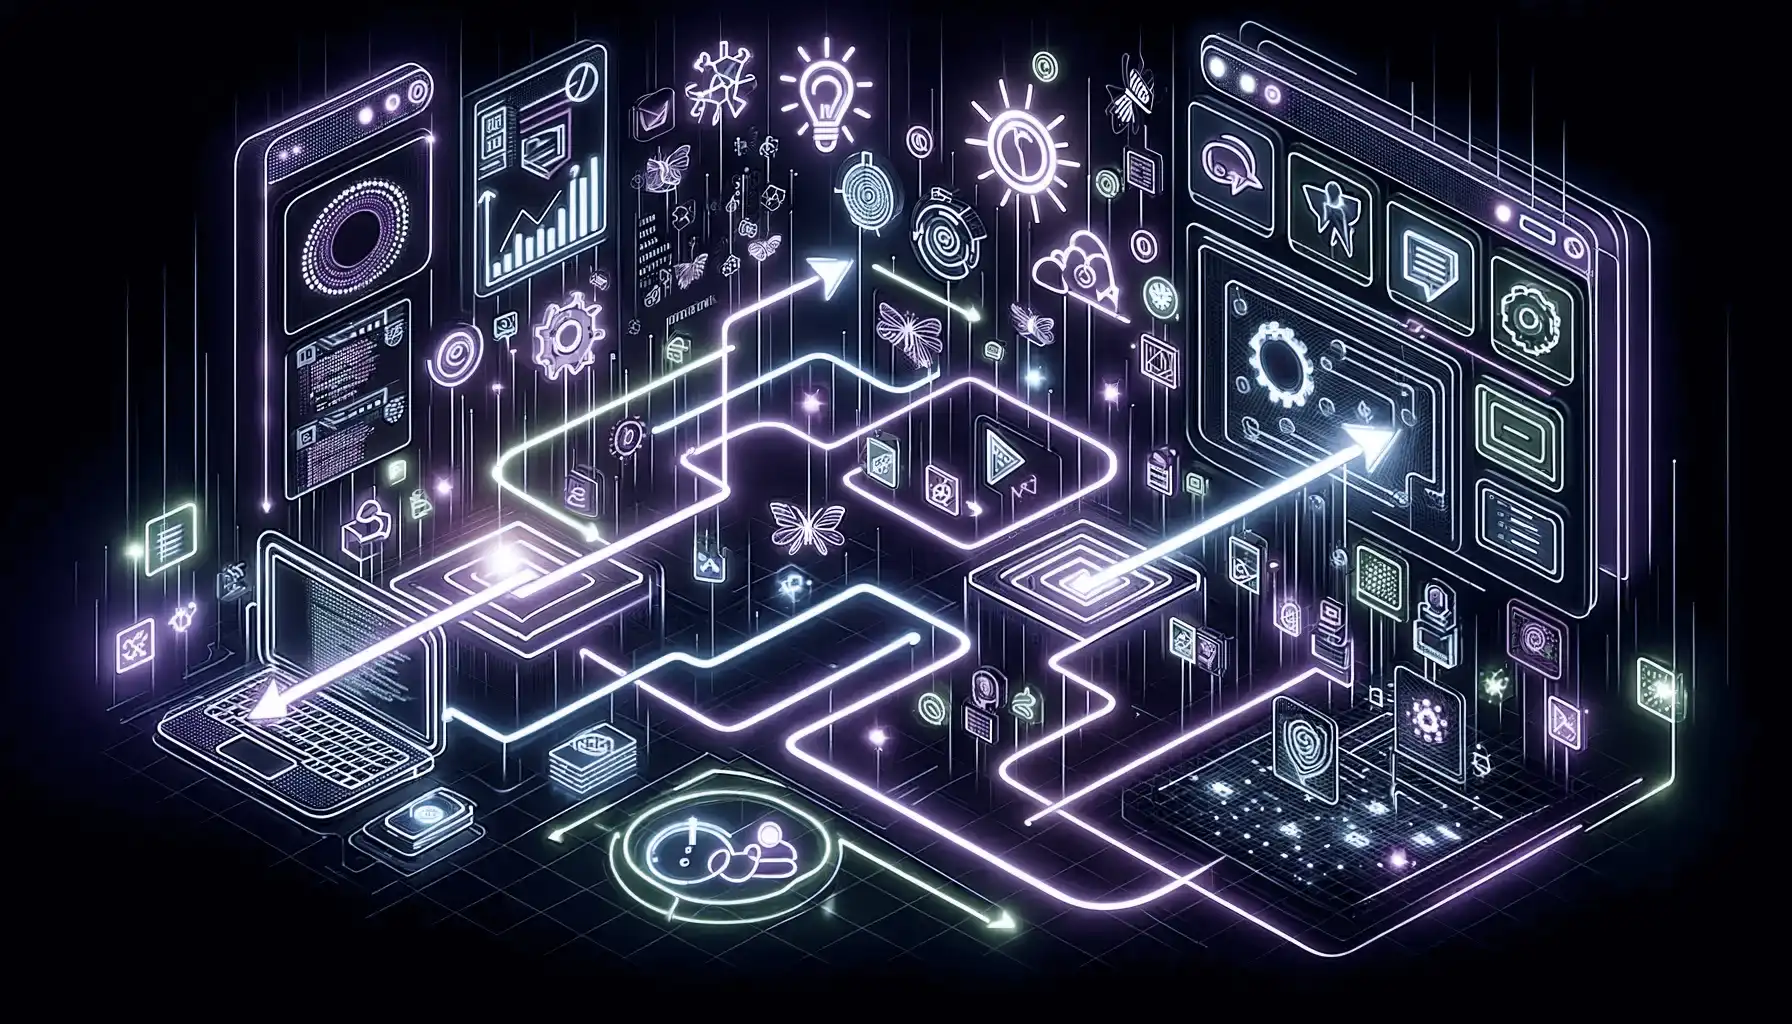 This 16x9 image depicts a futuristic digital environment where the optimization of business applications is visualized through purple and green neon lights. At the heart, a laptop and digital screens display graphs, charts, and code, all interconnected by glowing neon pathways that represent the seamless restructuring of data and workflows. Icons symbolizing transactions, policies, and application features are linked by these vibrant streams, suggesting a continuous process of monitoring and improvement by application specialists. The overall aesthetic communicates a high-tech, efficient approach to ensuring applications deliver seamless transactions and optimized performance in line with business objectives.